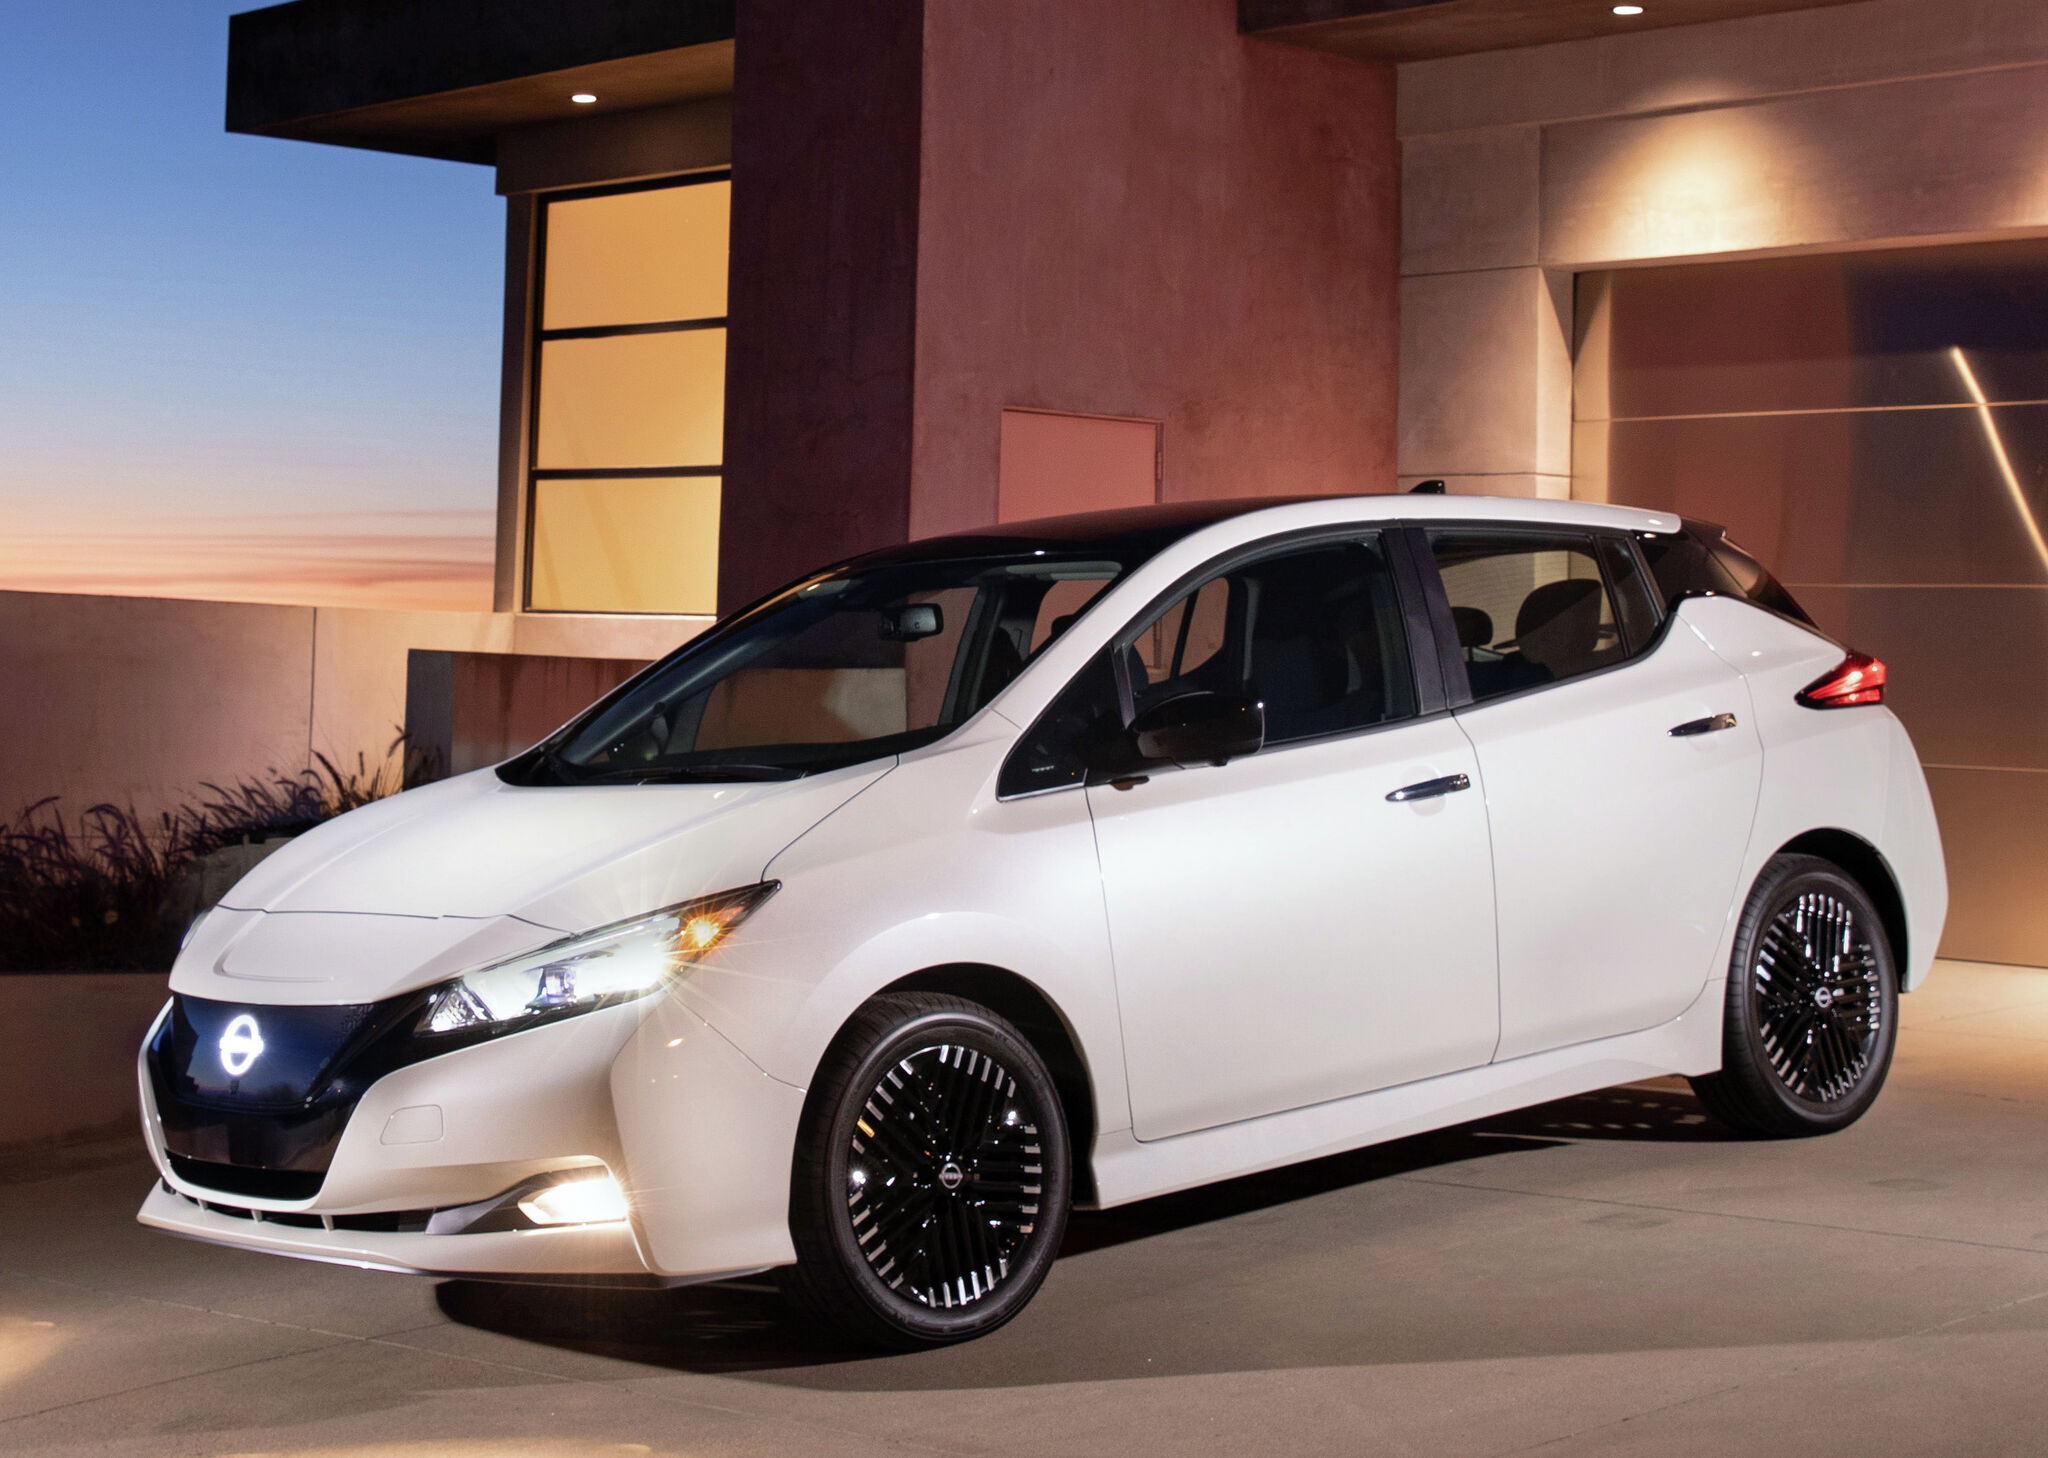 Nissan Leaf SL Plus can go 212 miles on a single charge, starts at 36,040